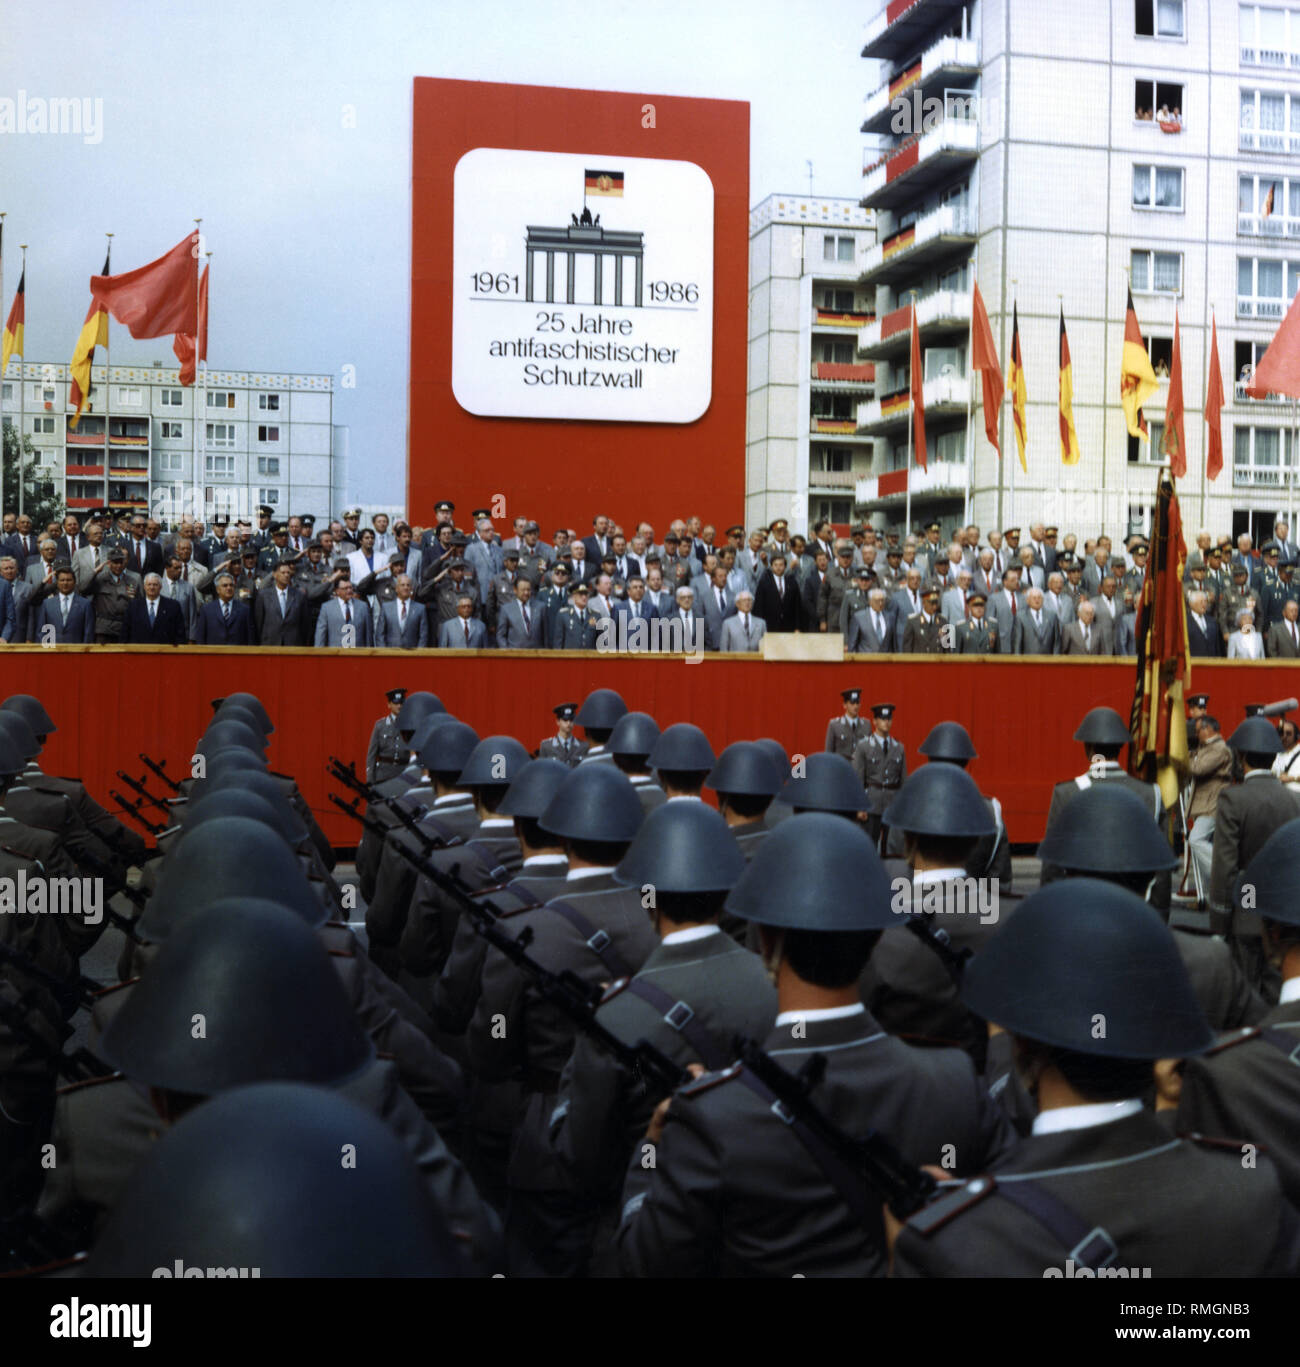 The VIP stand at the celebrations of the "25 years of the Berlin Wall". In the first row, the members of the SED Politburo, including Erich Honecker (on the left next to the lectern). In the foreground, soldiers of the NVA as part of a military parade. Stock Photo